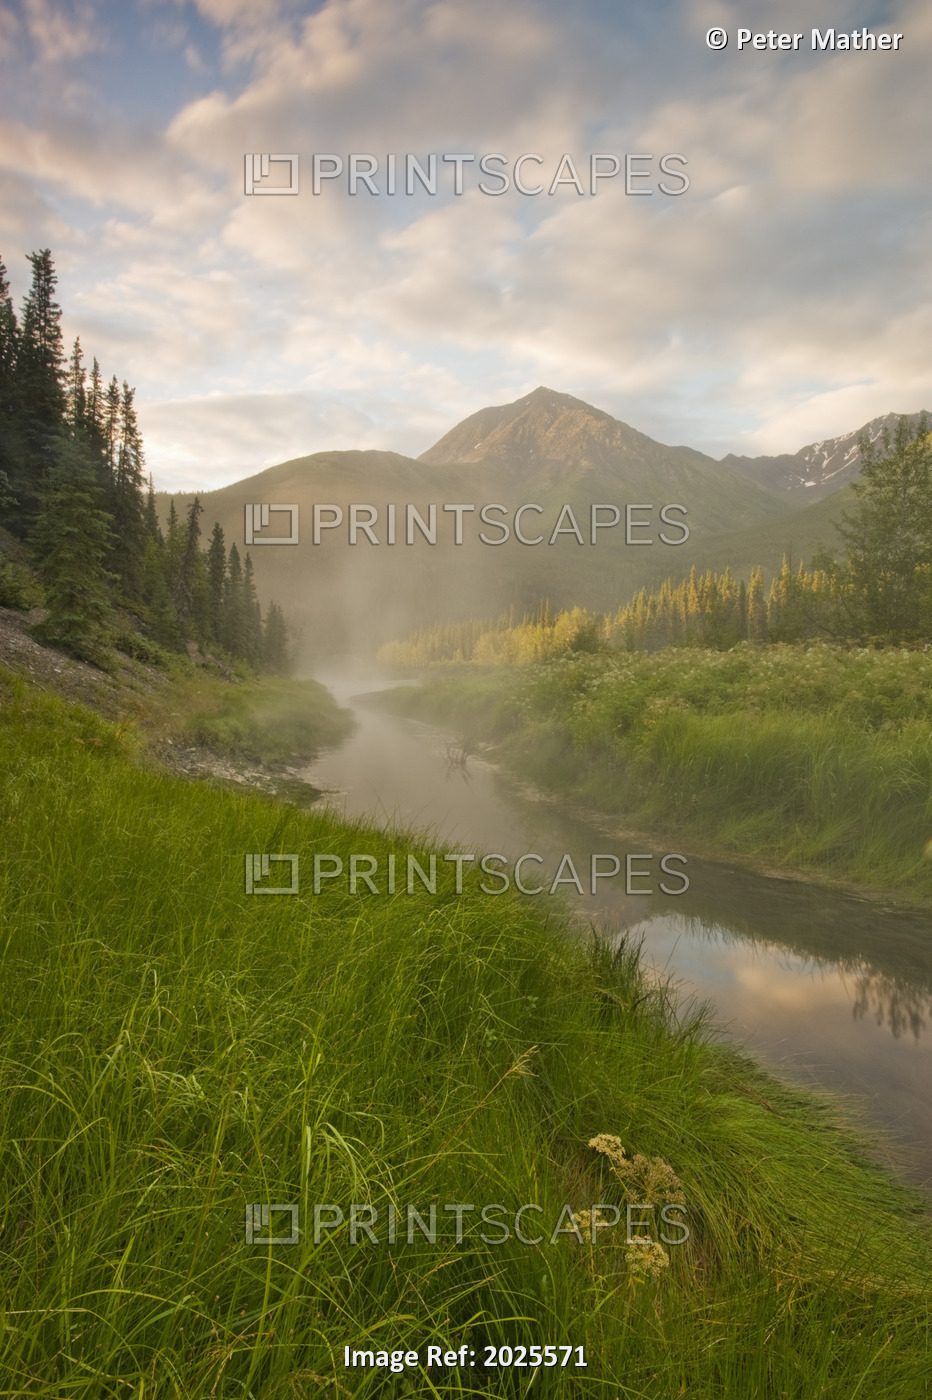 Steam Rising From Moore's Hot Springs With Lush Grass In Foreground, Nahanni ...